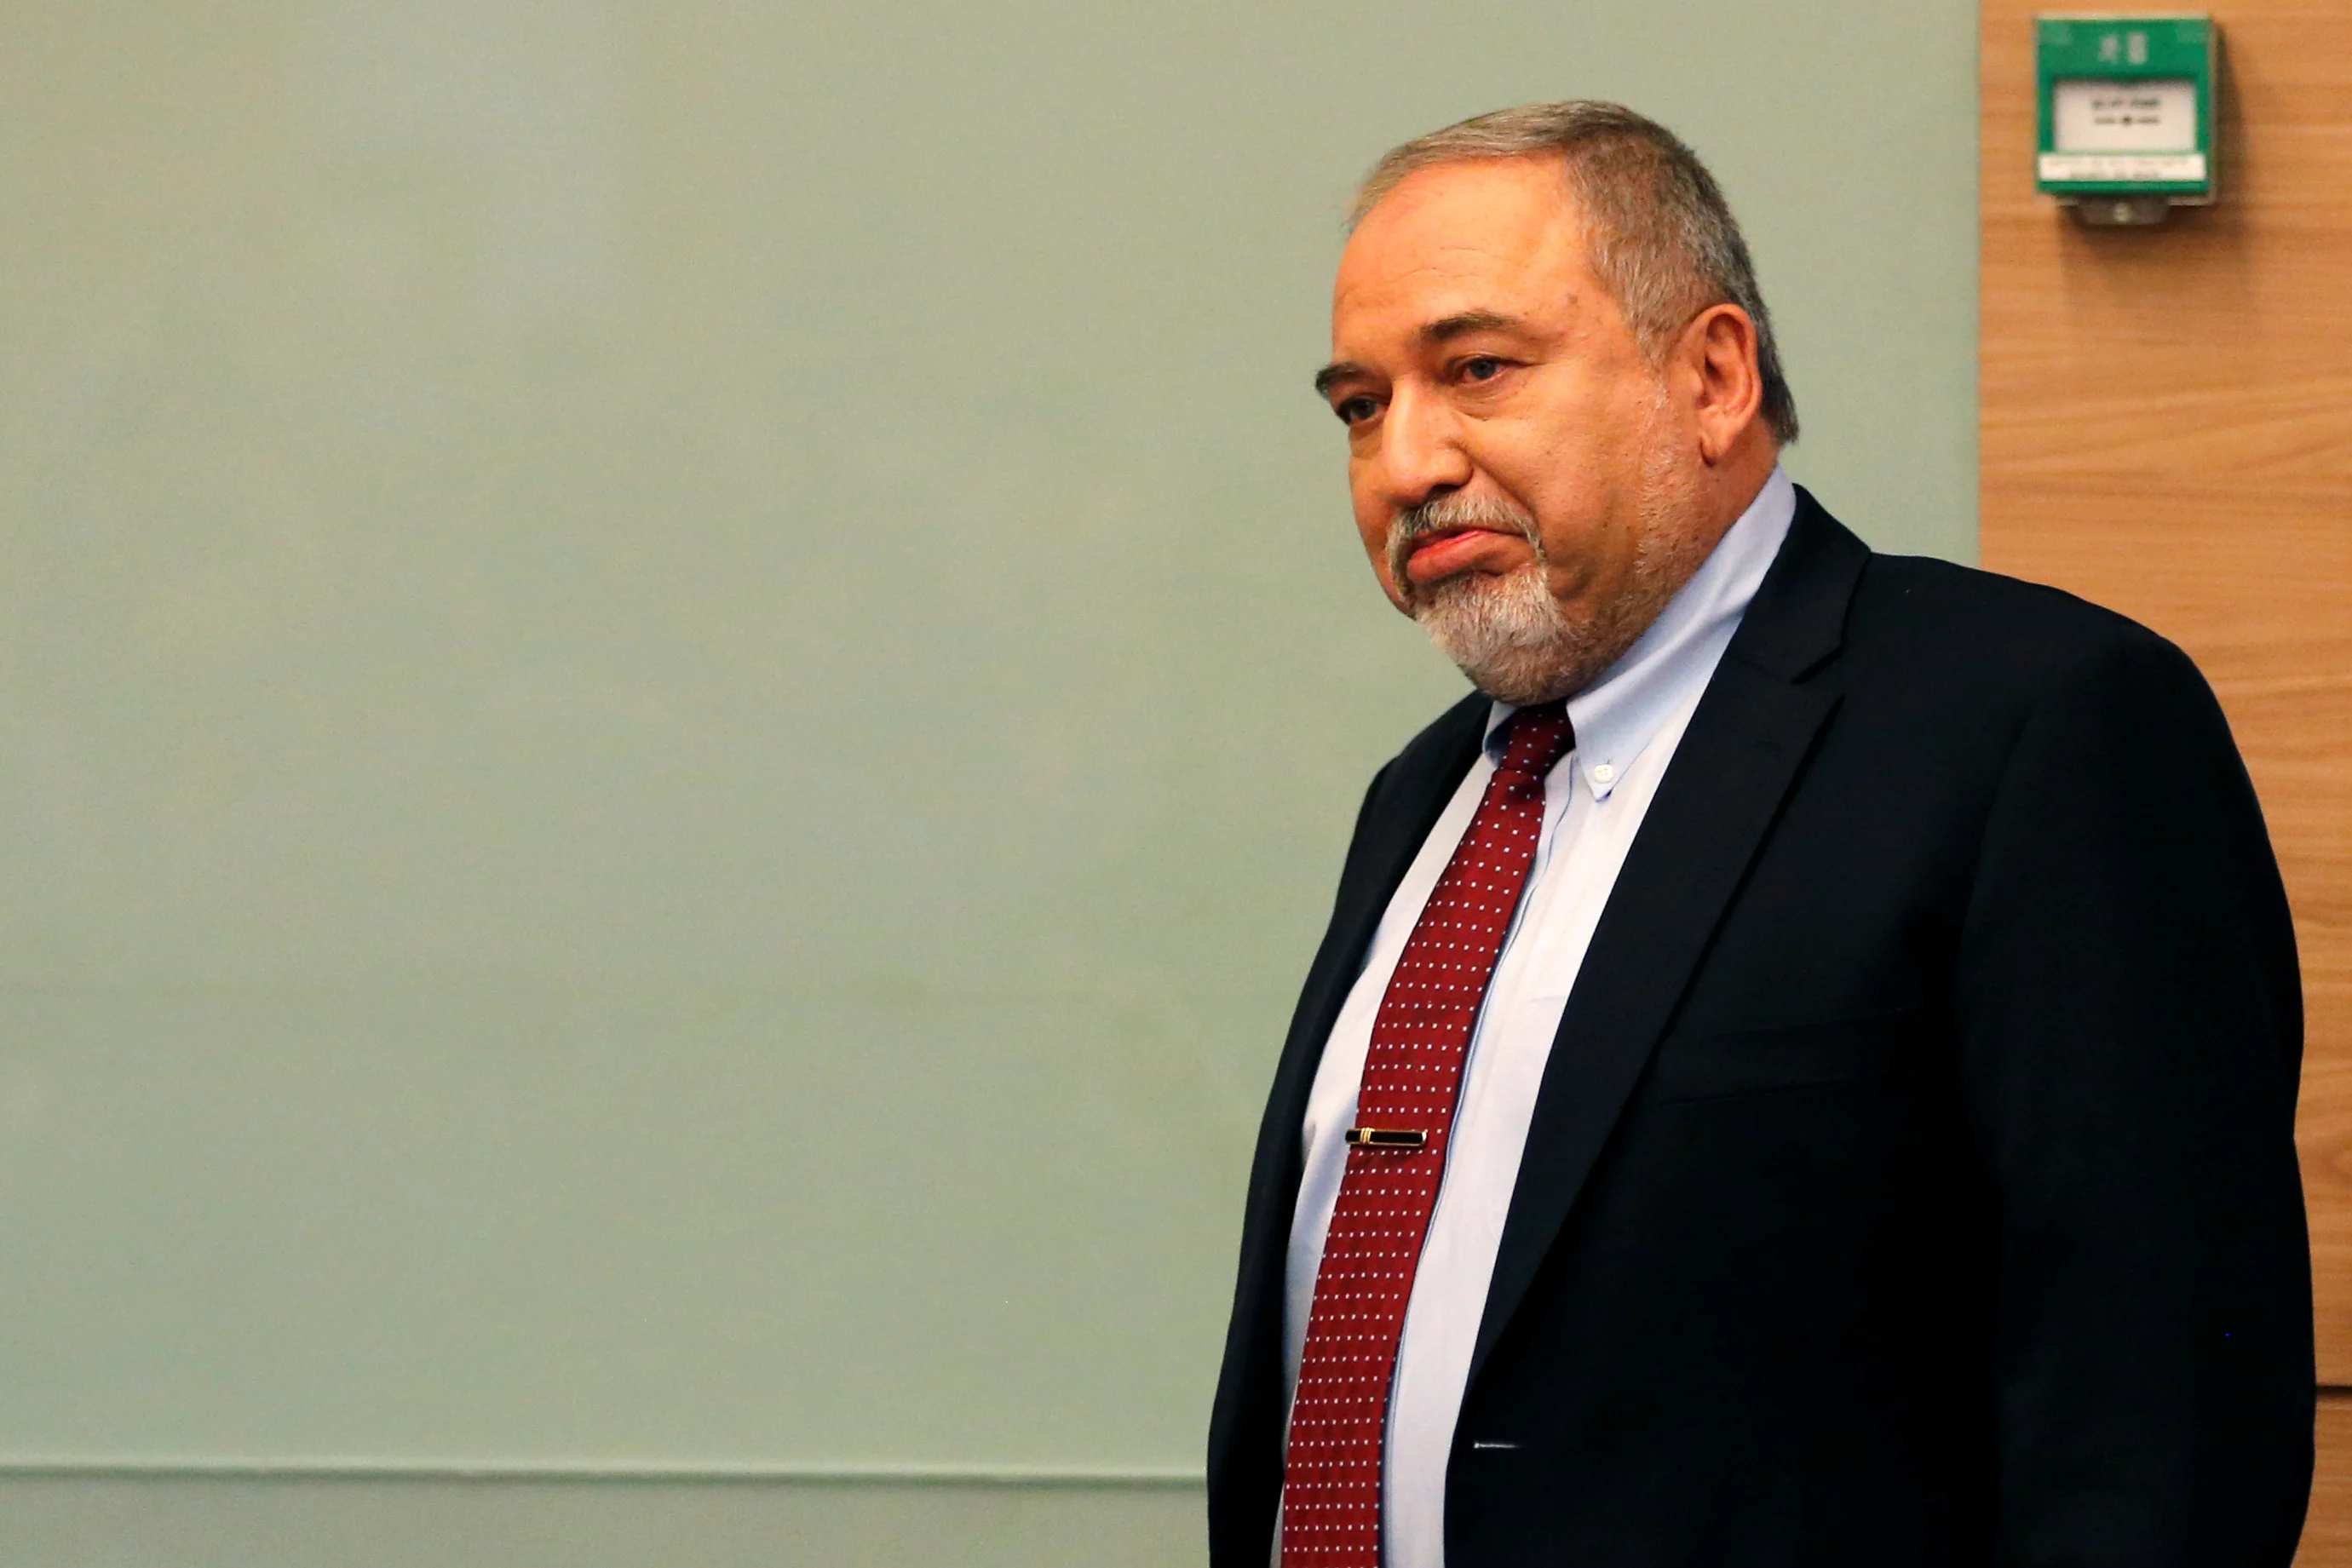 Israel's Defence Minister Avigdor Lieberman Arrives To Delivers A Statement To The Media Following His Party, Yisrael Beitenu, Faction Meeting At The Knesset, Israel's Parliament, In Jerusalem